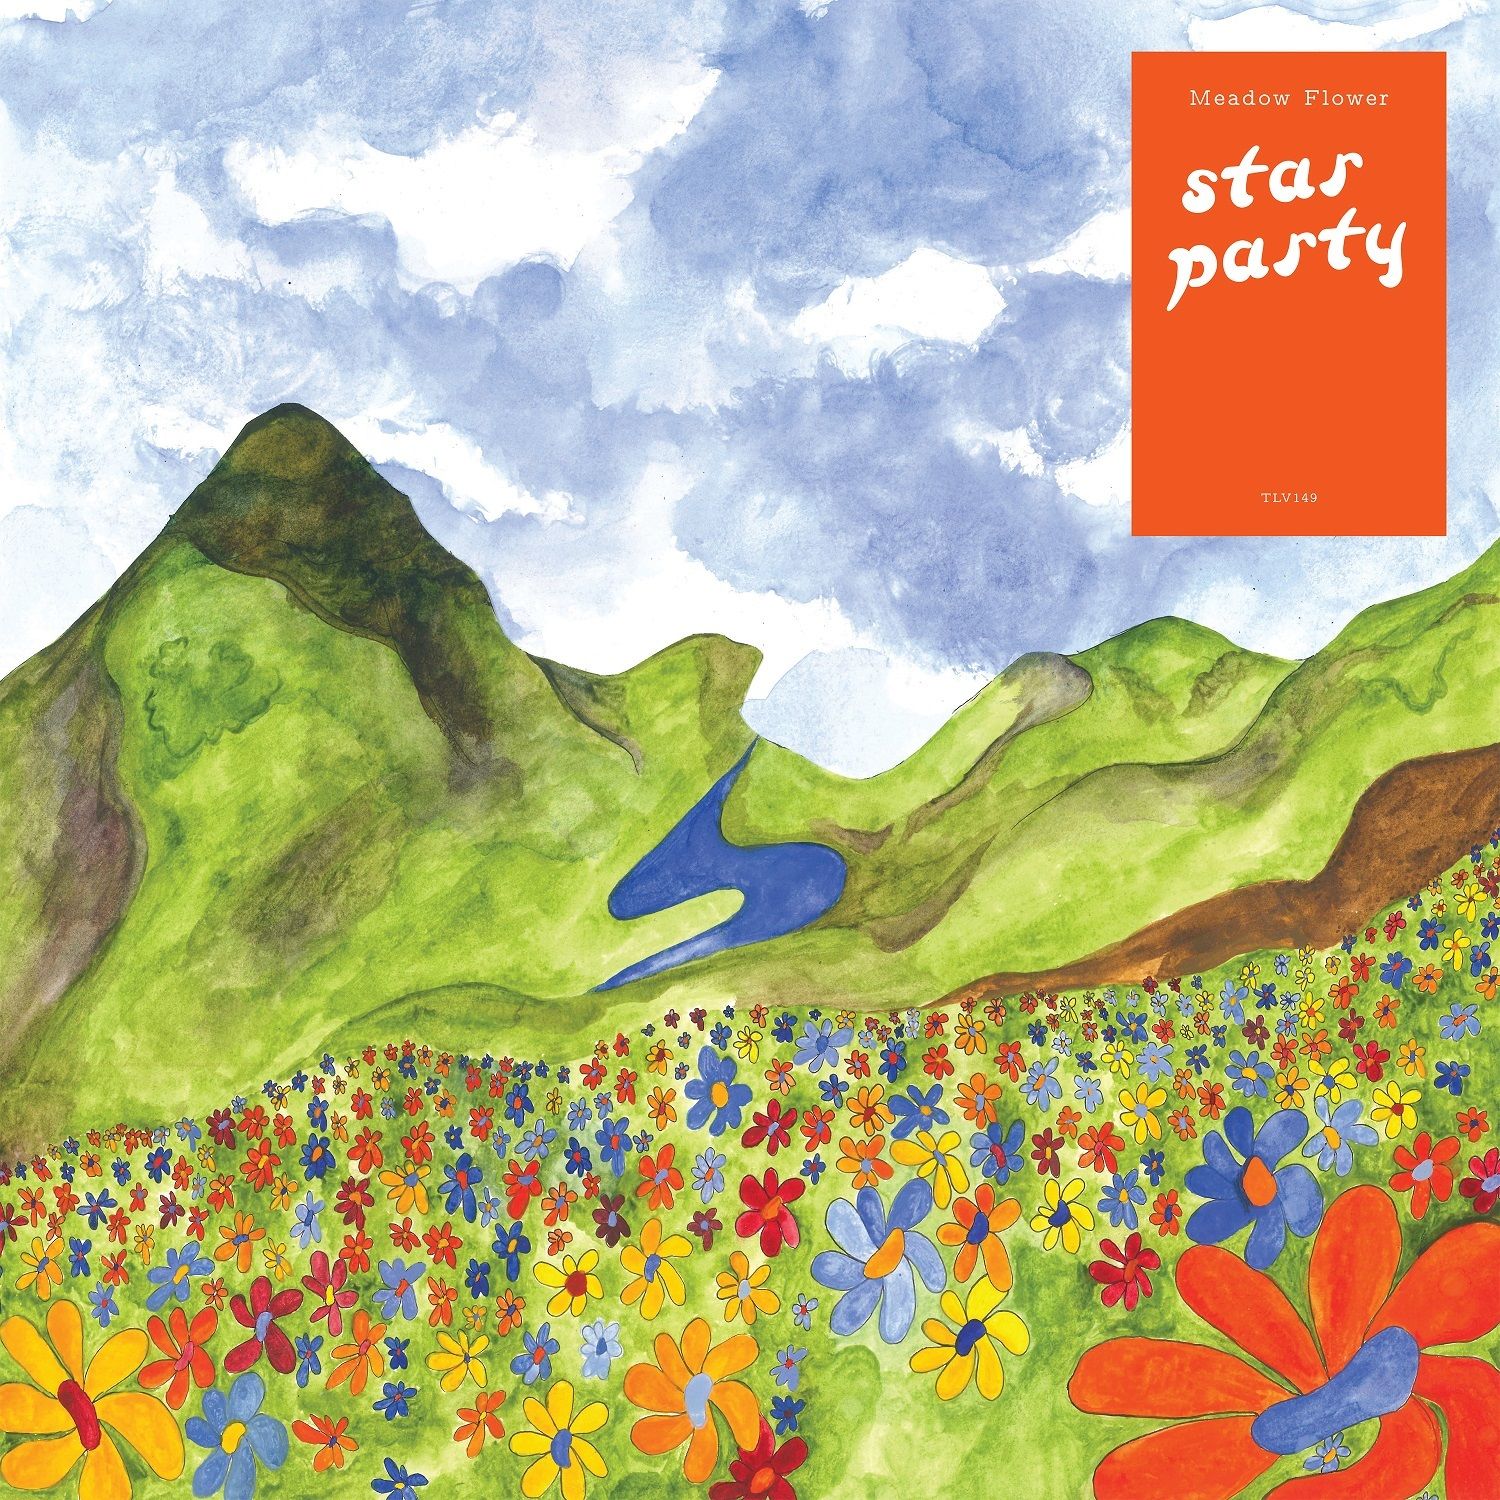 Star Party - Meadow Flower: Limited Edition Pastel Blue Vinyl LP